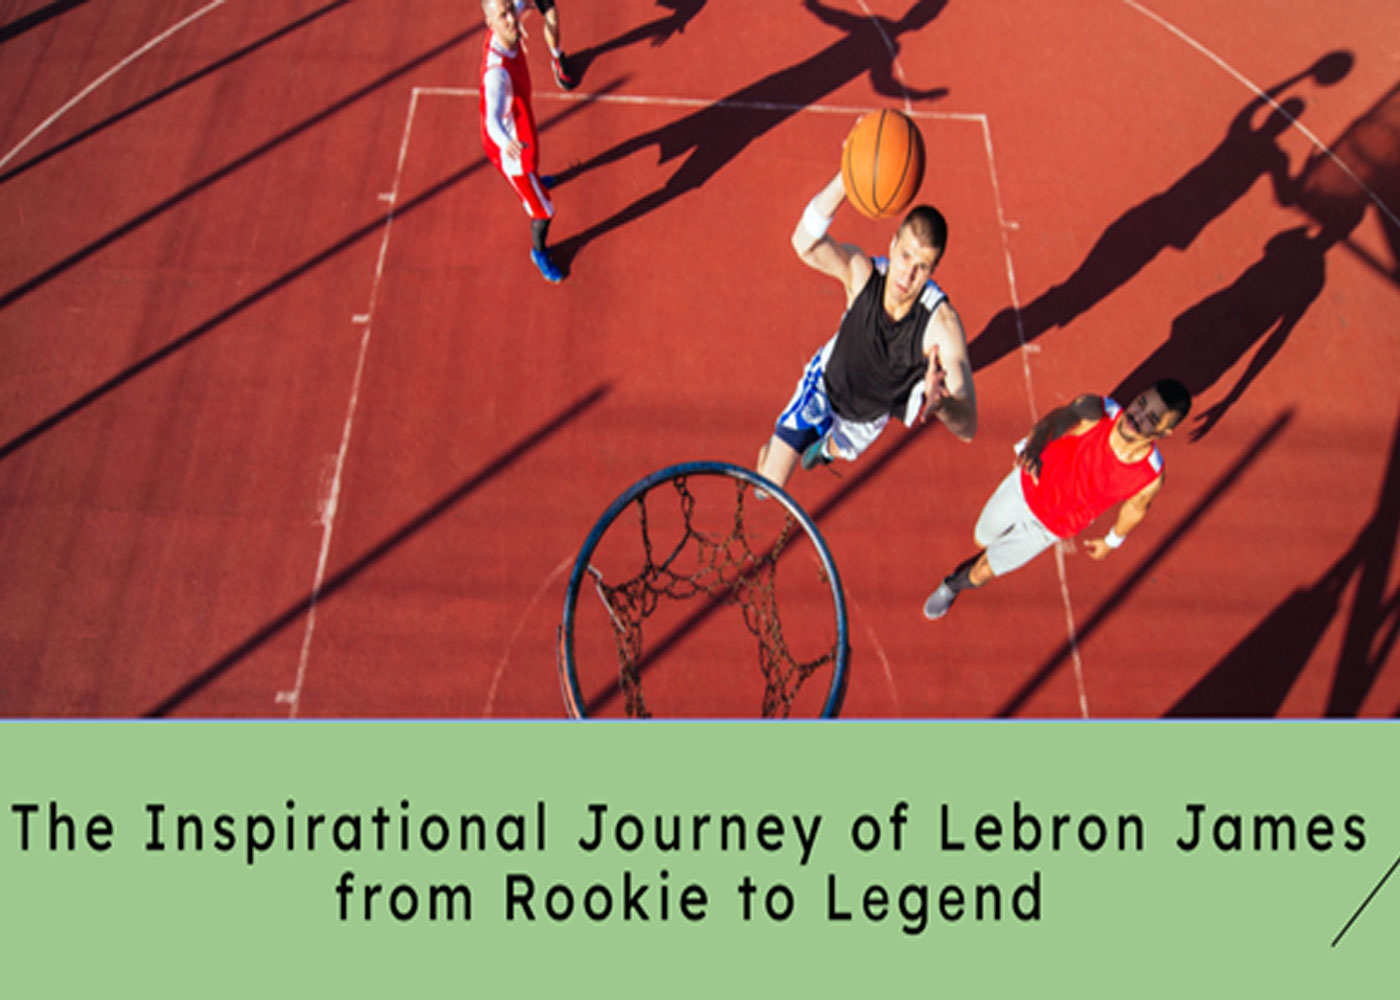 The Inspirational Journey of Lebron James from Rookie to Legend